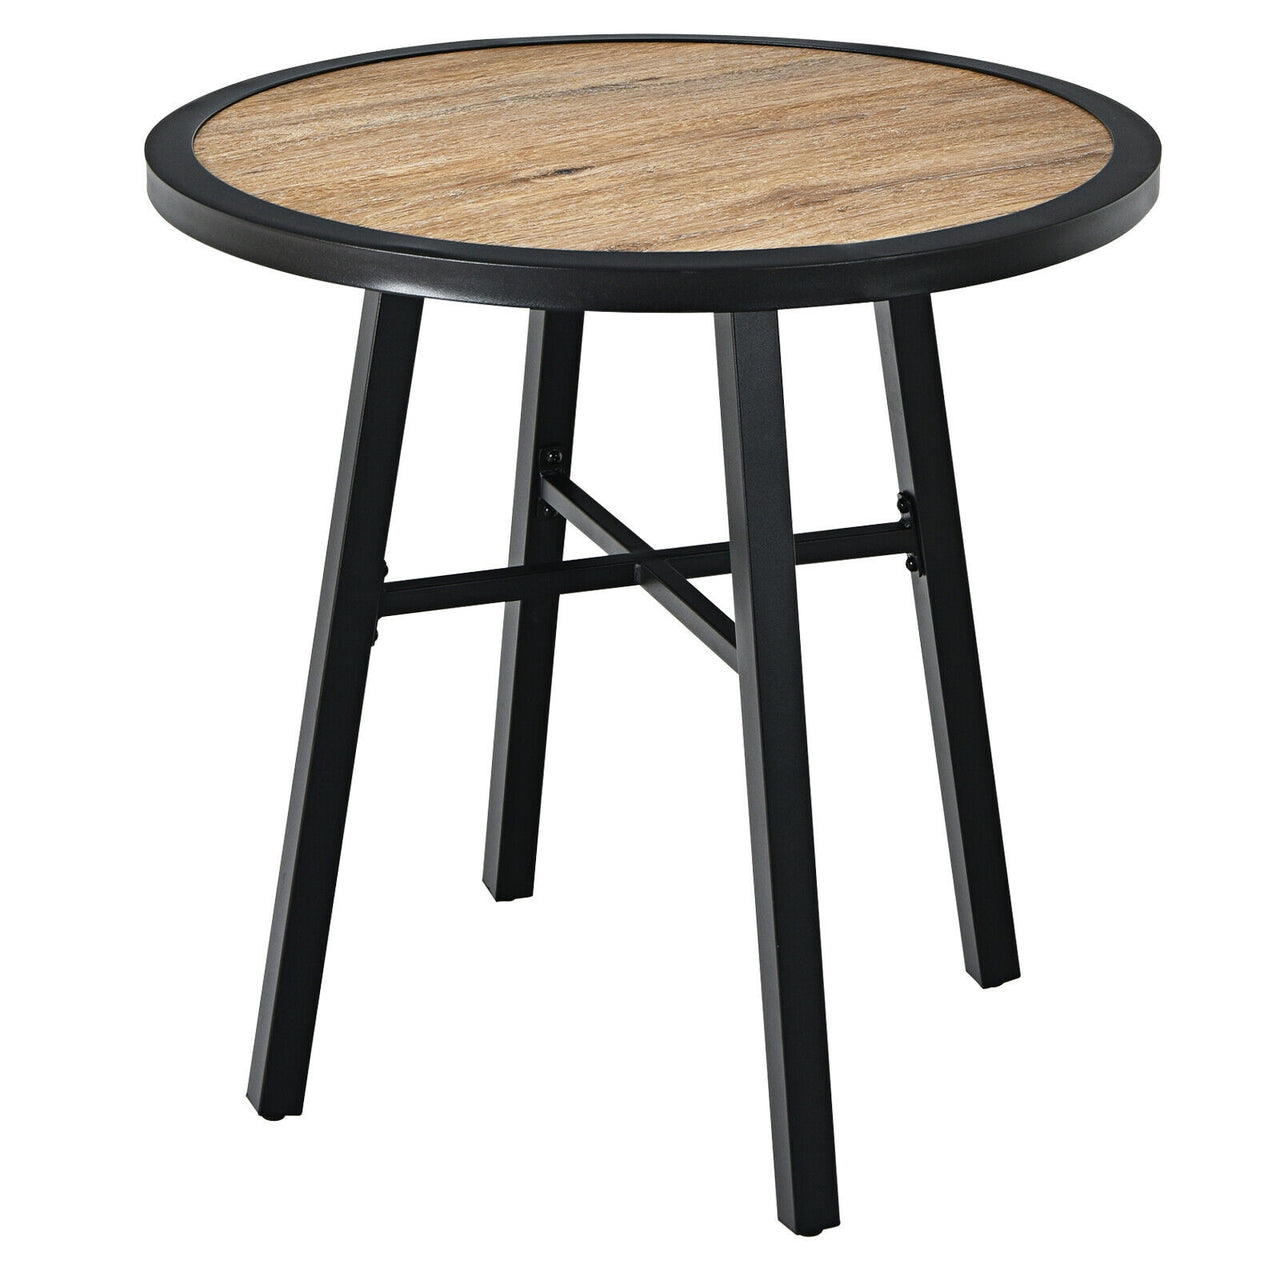 29 Inch Patio Round Bistro Metal Table with Wood-Like Top - Gallery View 3 of 10